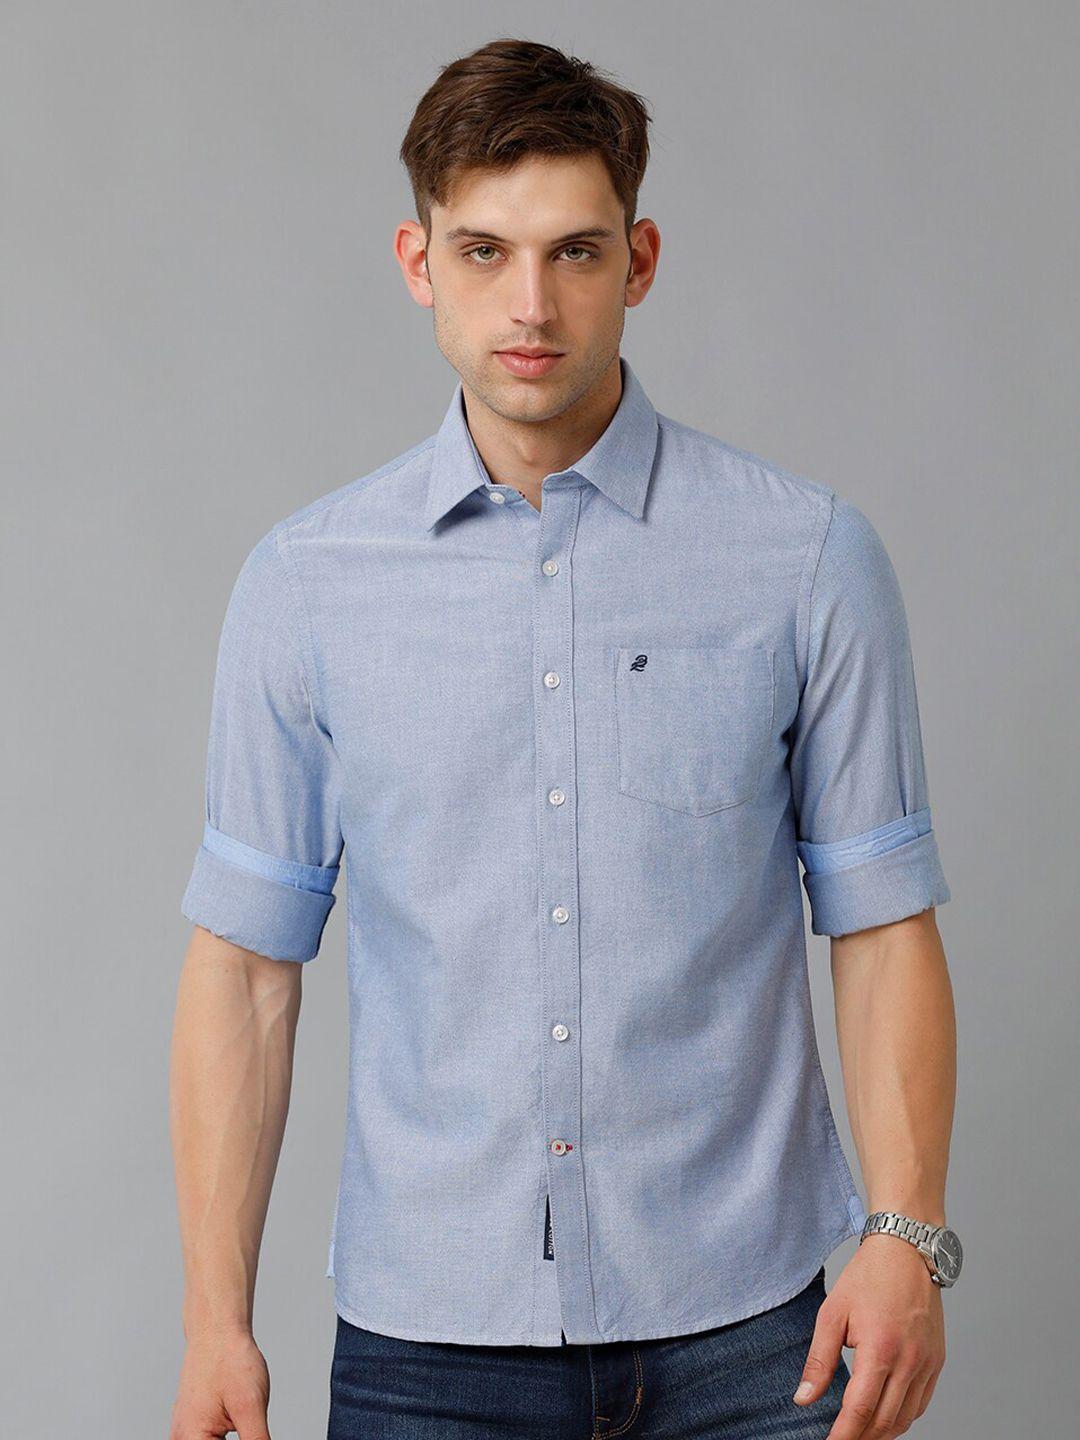 double two spread collar slim fit cotton casual shirt